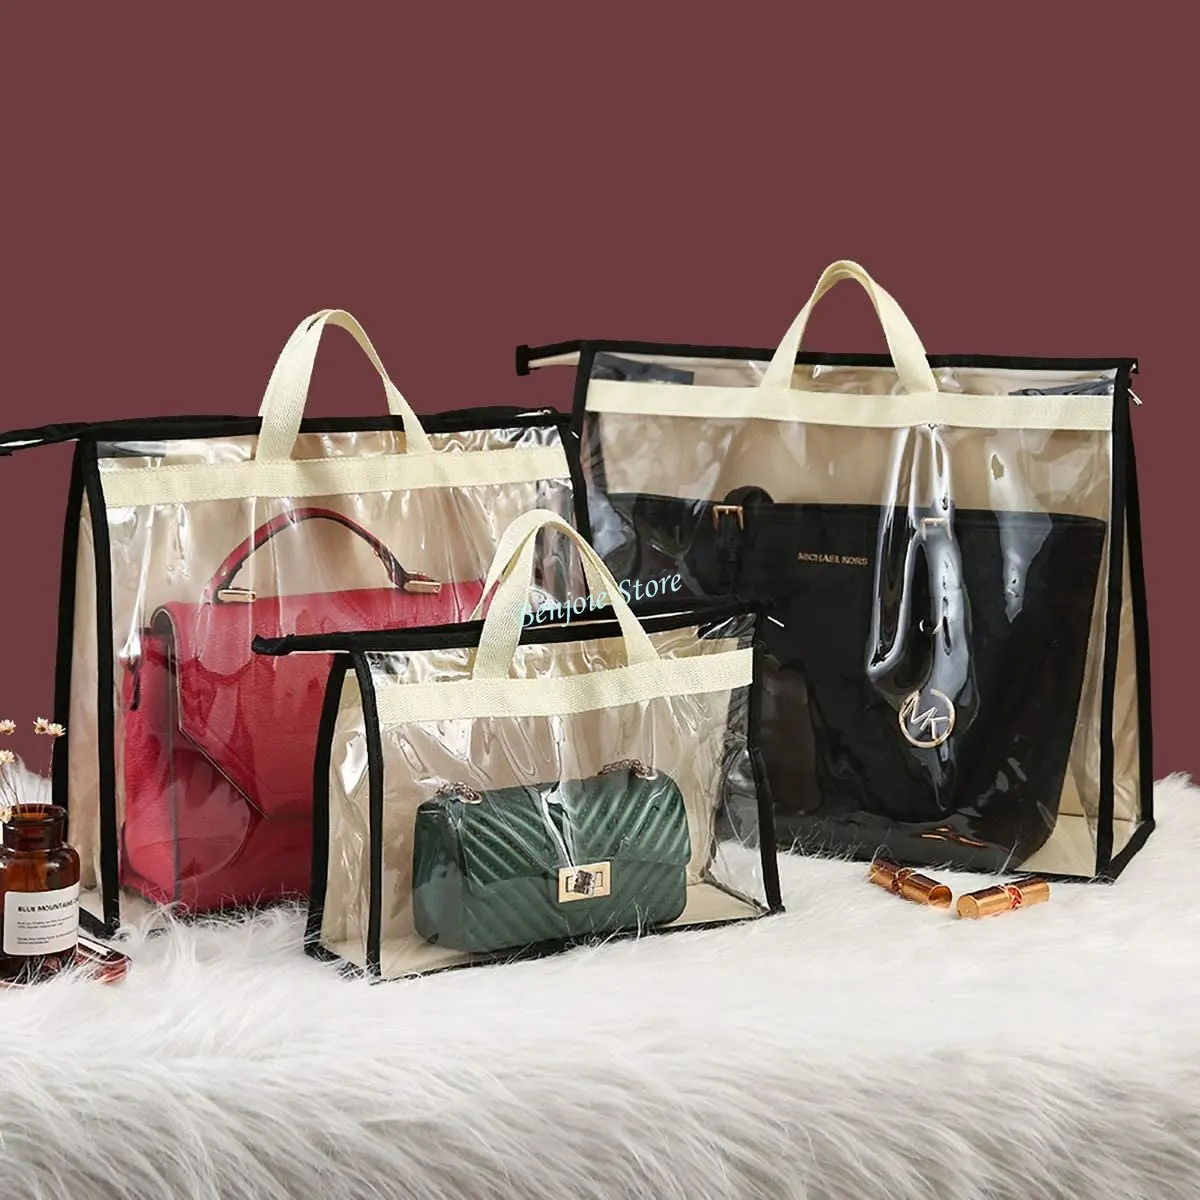 Dust cover bags for handbags